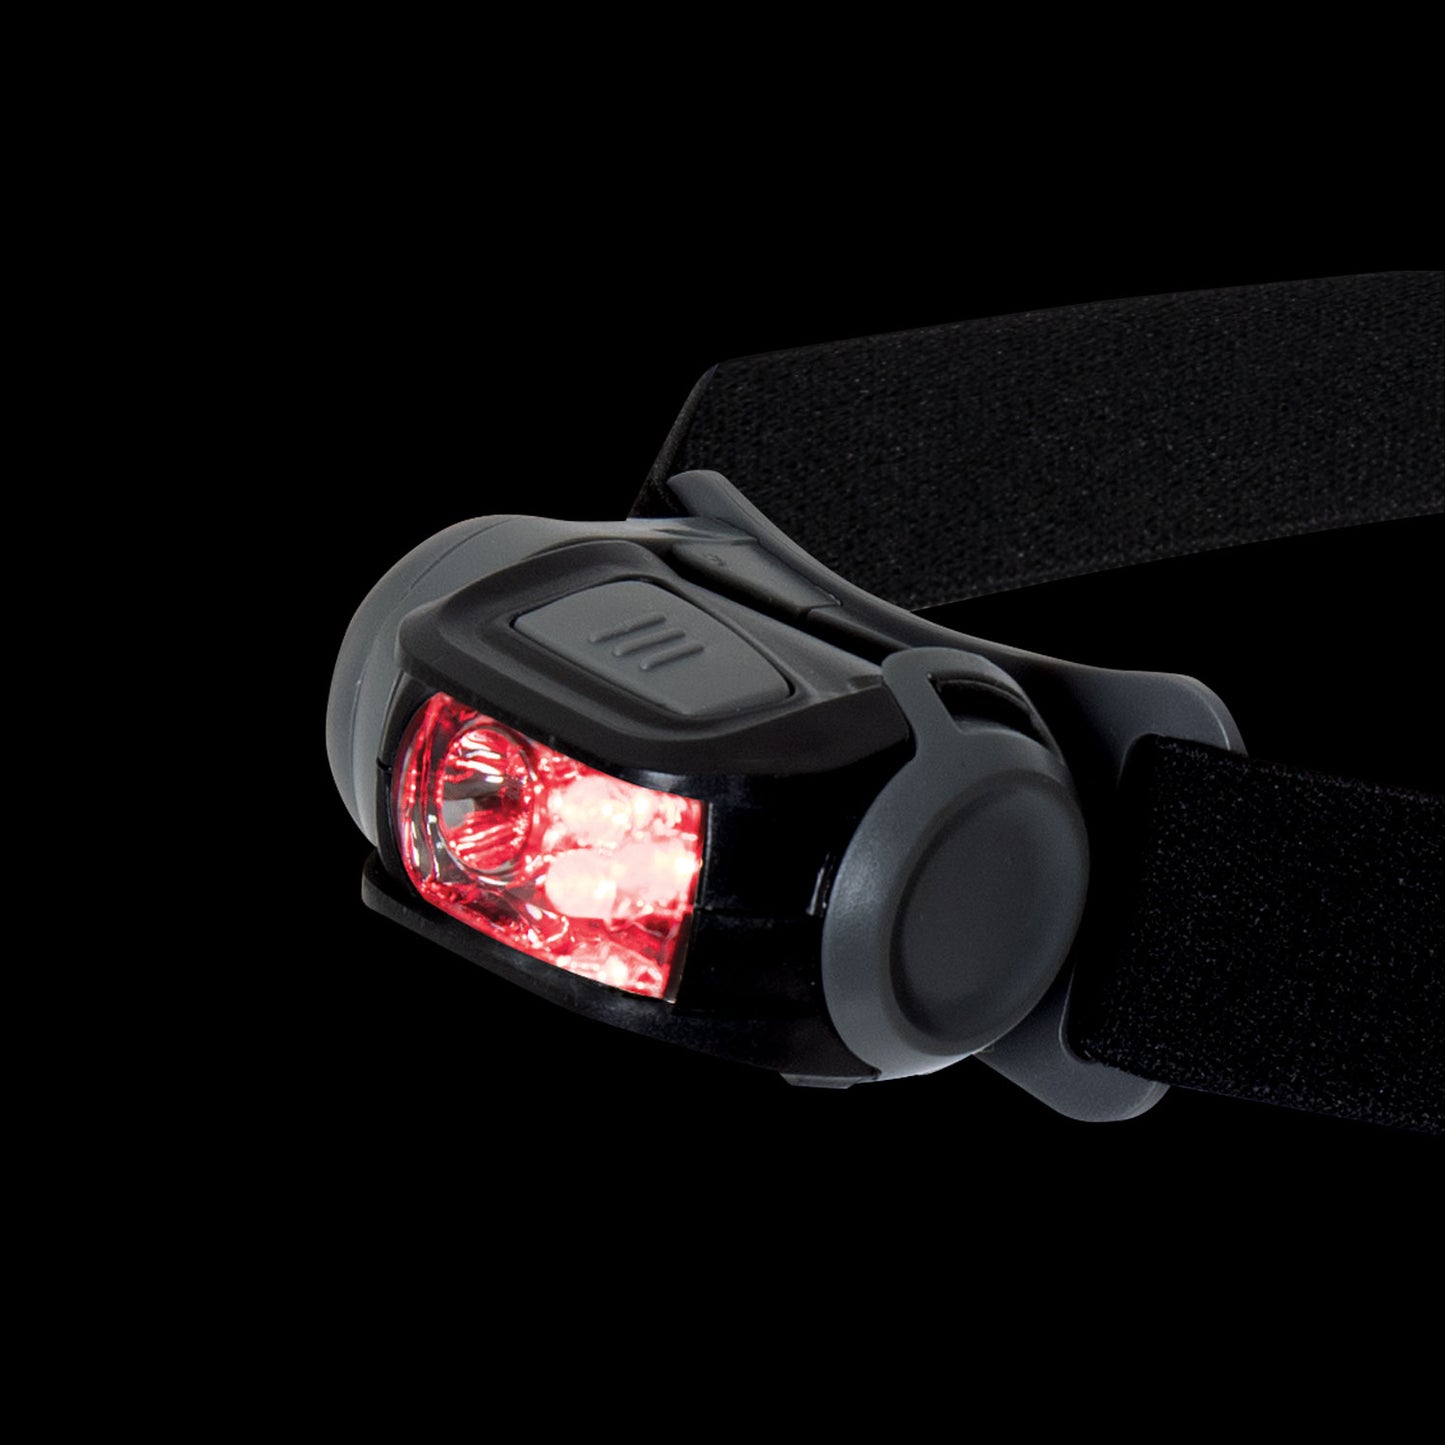 LED Headlamp, 3 AAA batteries sold separately